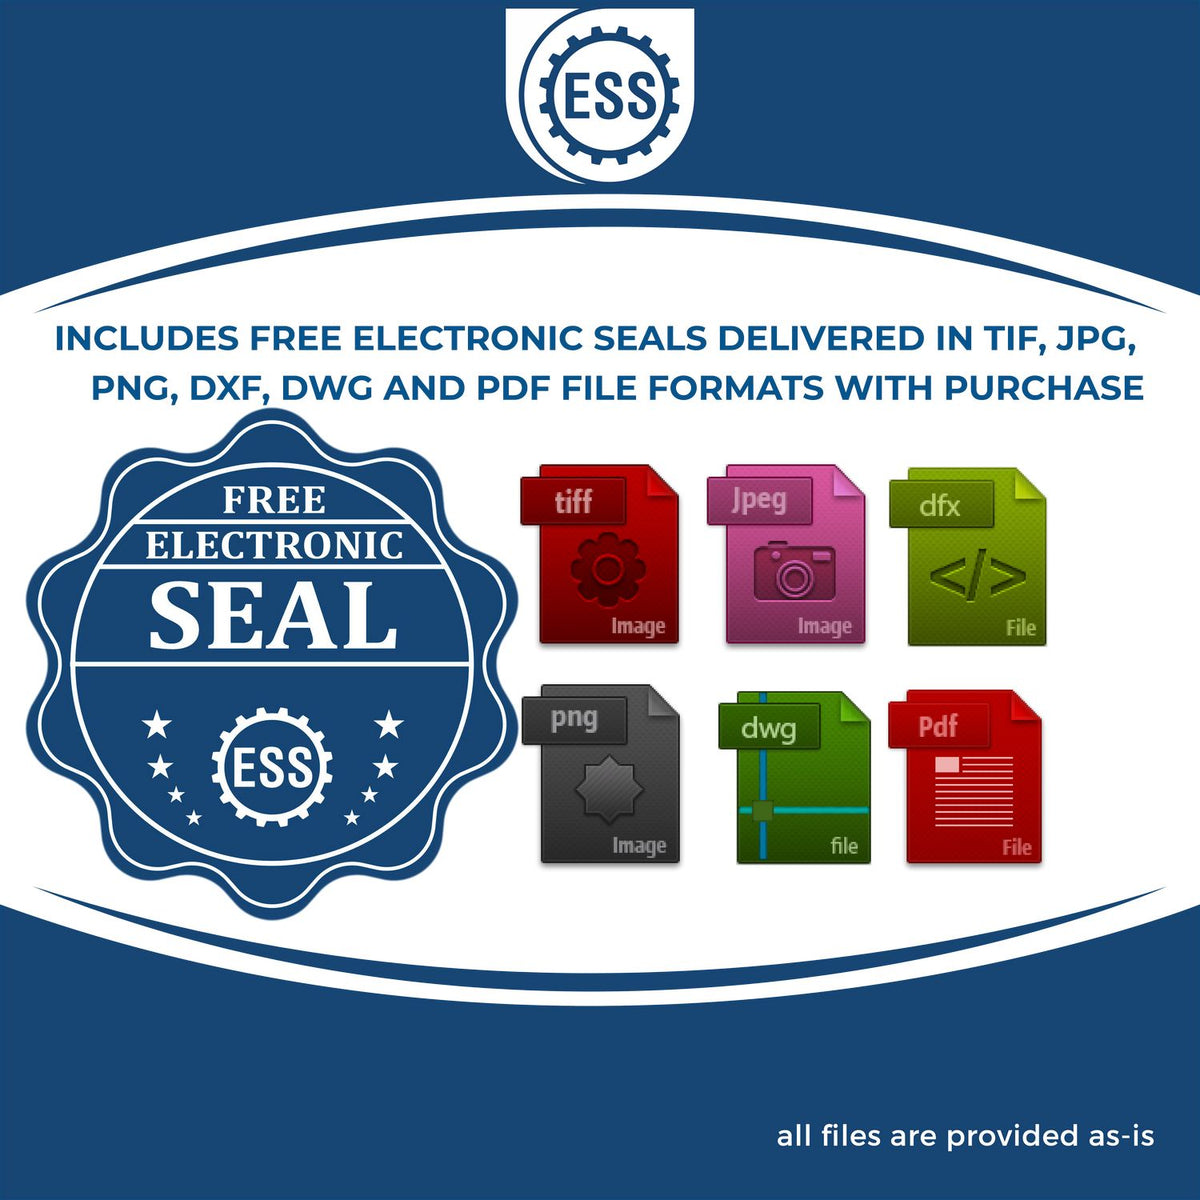 An infographic for the free electronic seal for the Heavy Duty Cast Iron Arkansas Land Surveyor Seal Embosser illustrating the different file type icons such as DXF, DWG, TIF, JPG and PNG.